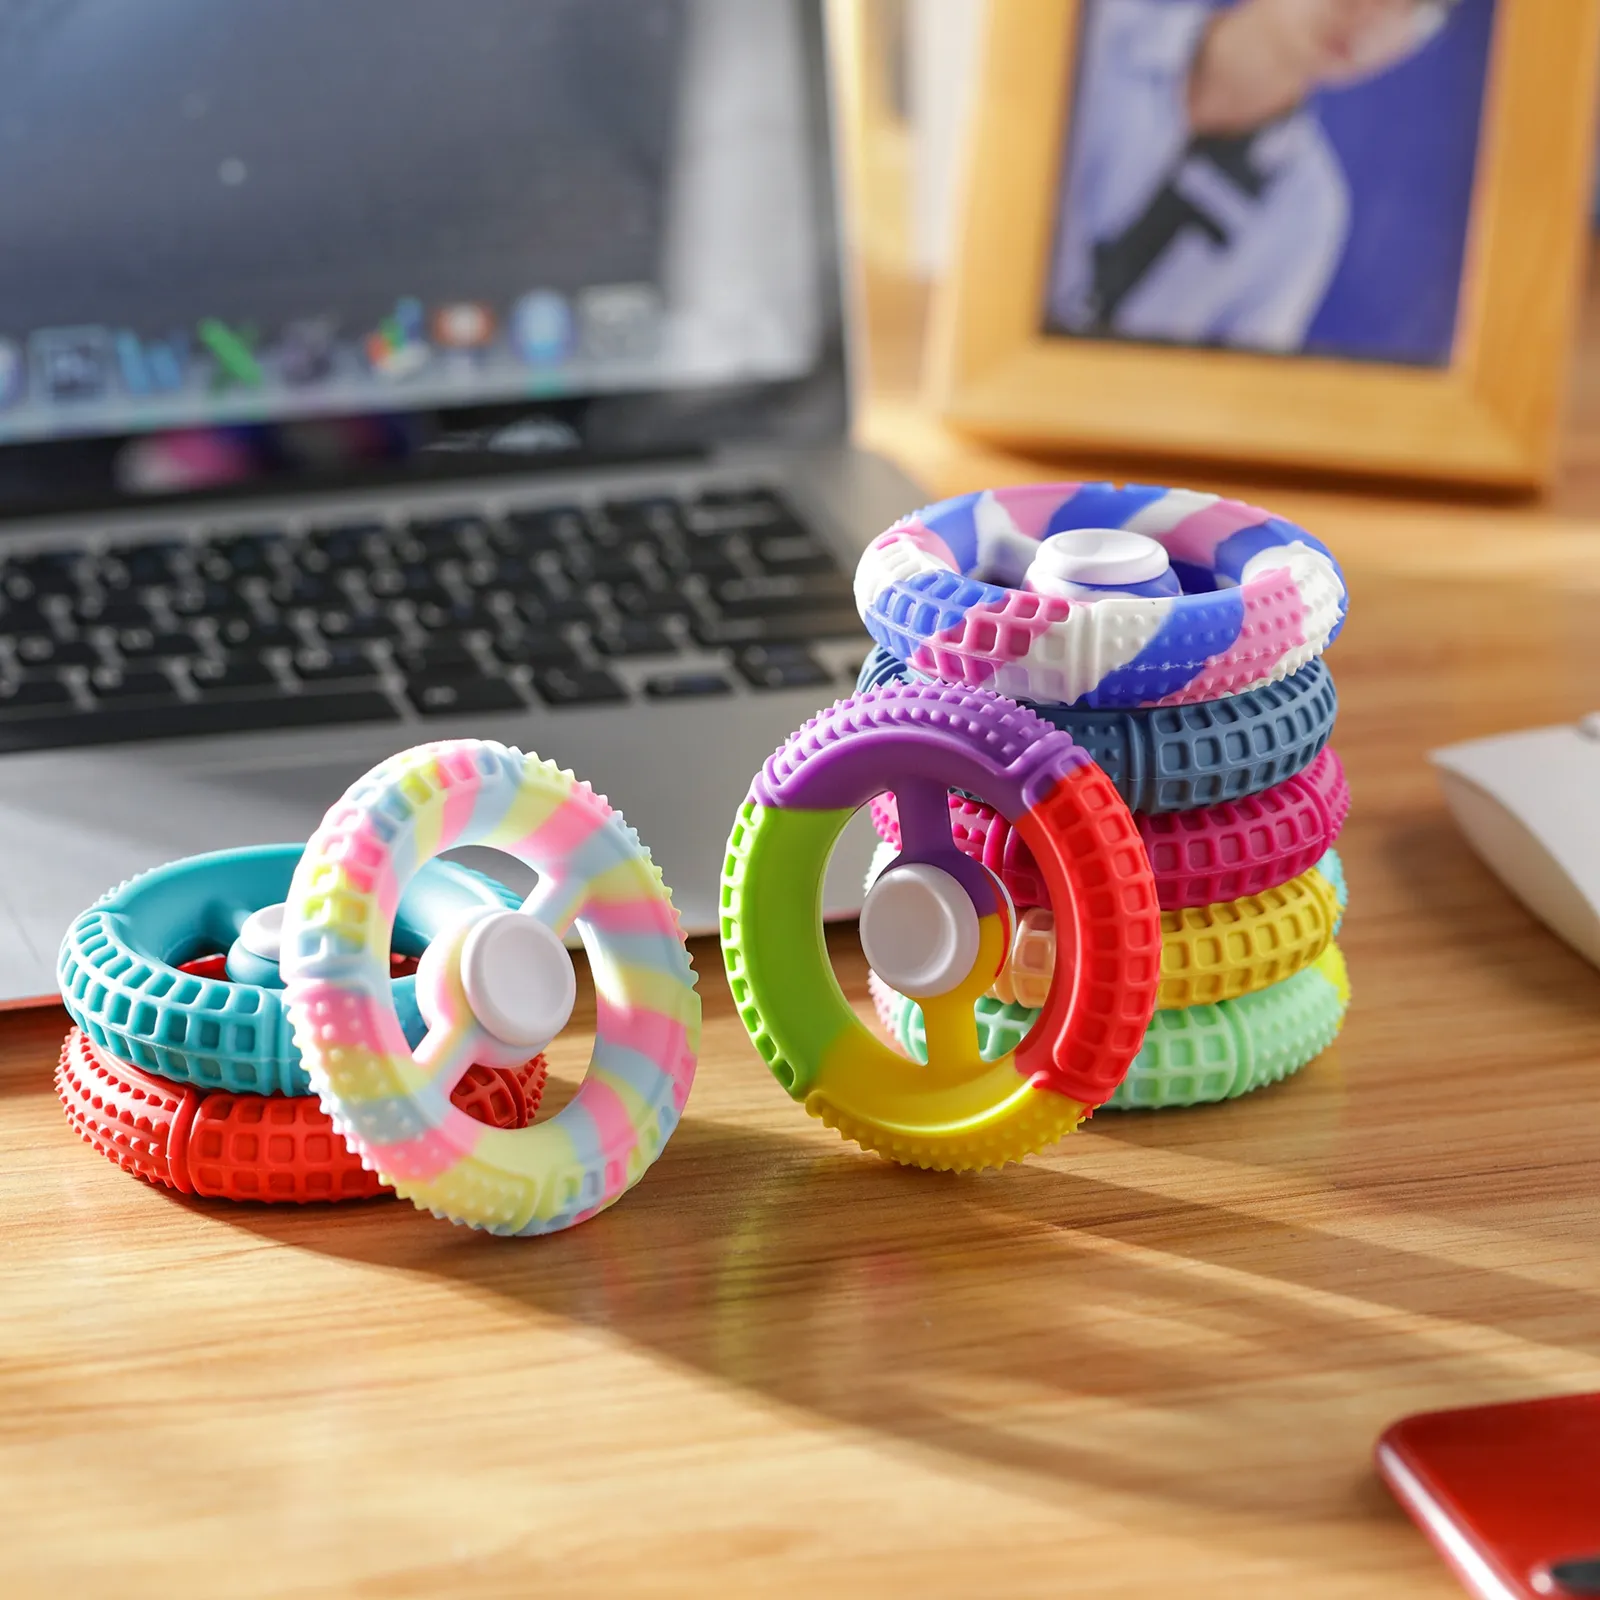 2022 New Arrival Rainbow Colors Round Wheel shape Snapper Spinner toy for Kids Stress relief funny spinner toy gifts